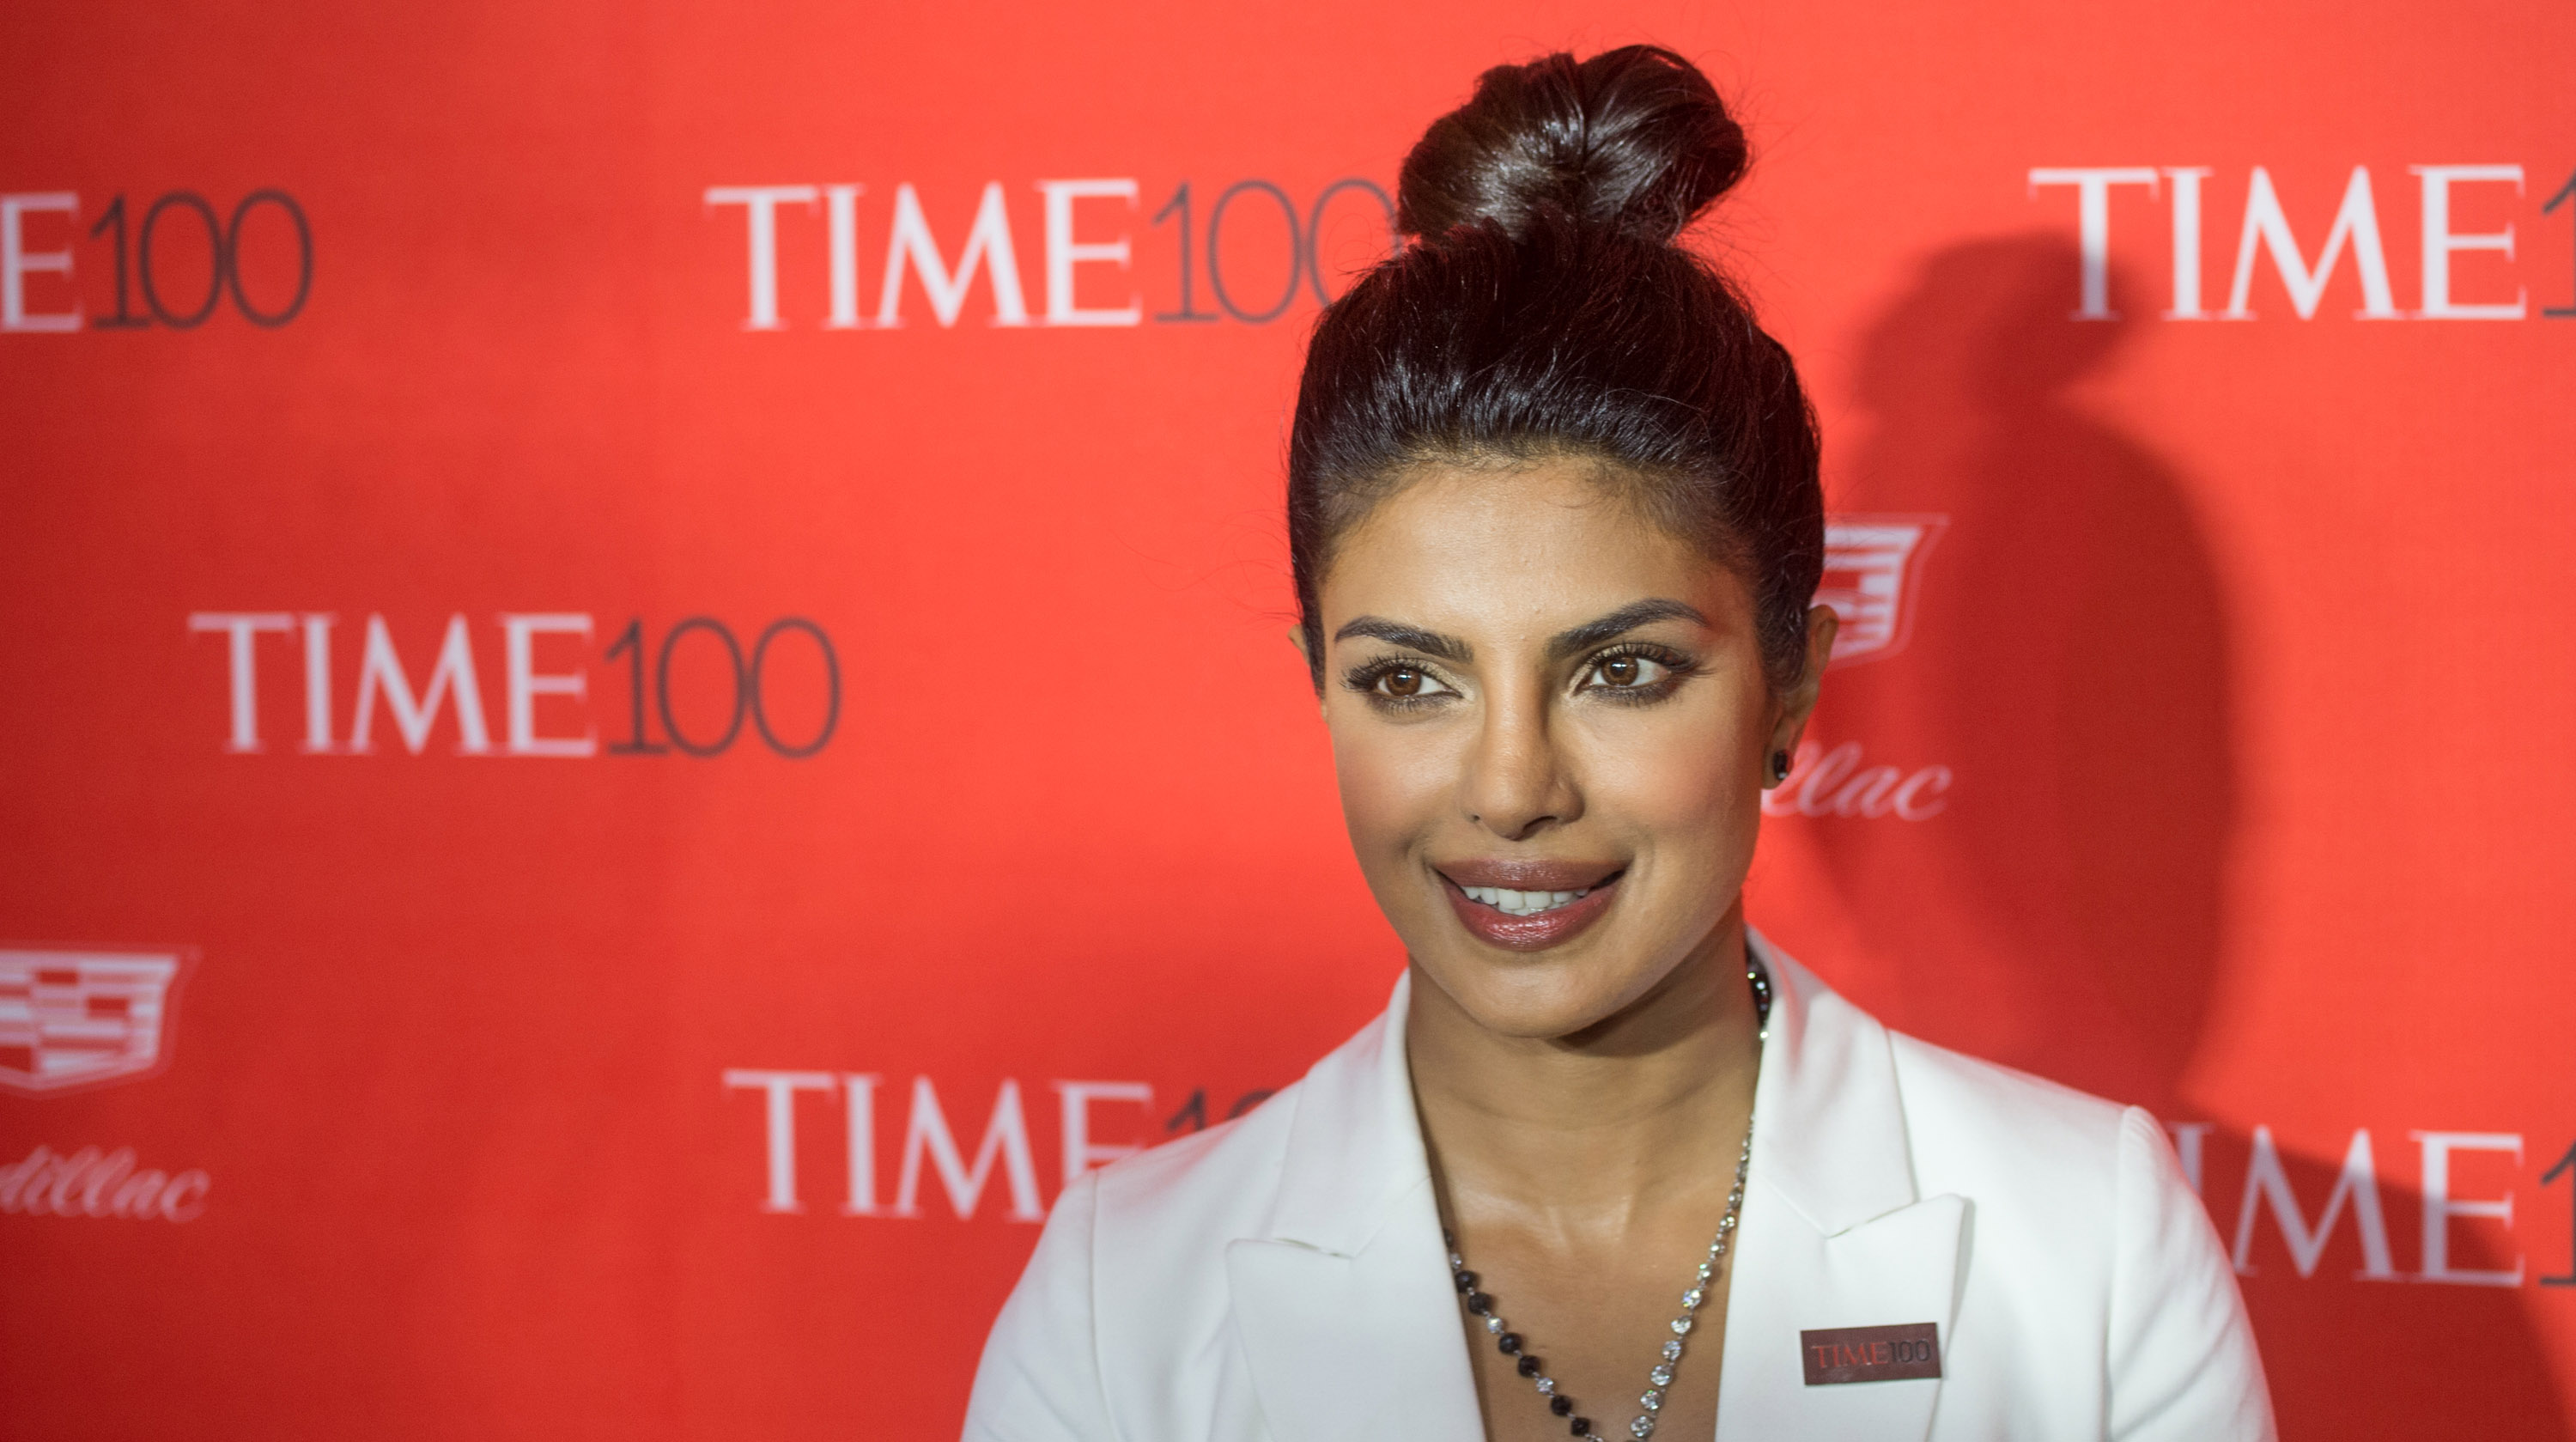 Actress Priyanka Chopra attends the 2016 Time 100 Gala at Frederick P. Rose Hall, Jazz at Lincoln Center on April 26, 2016 in New York City. (Mark Sagliocco—Getty Images)